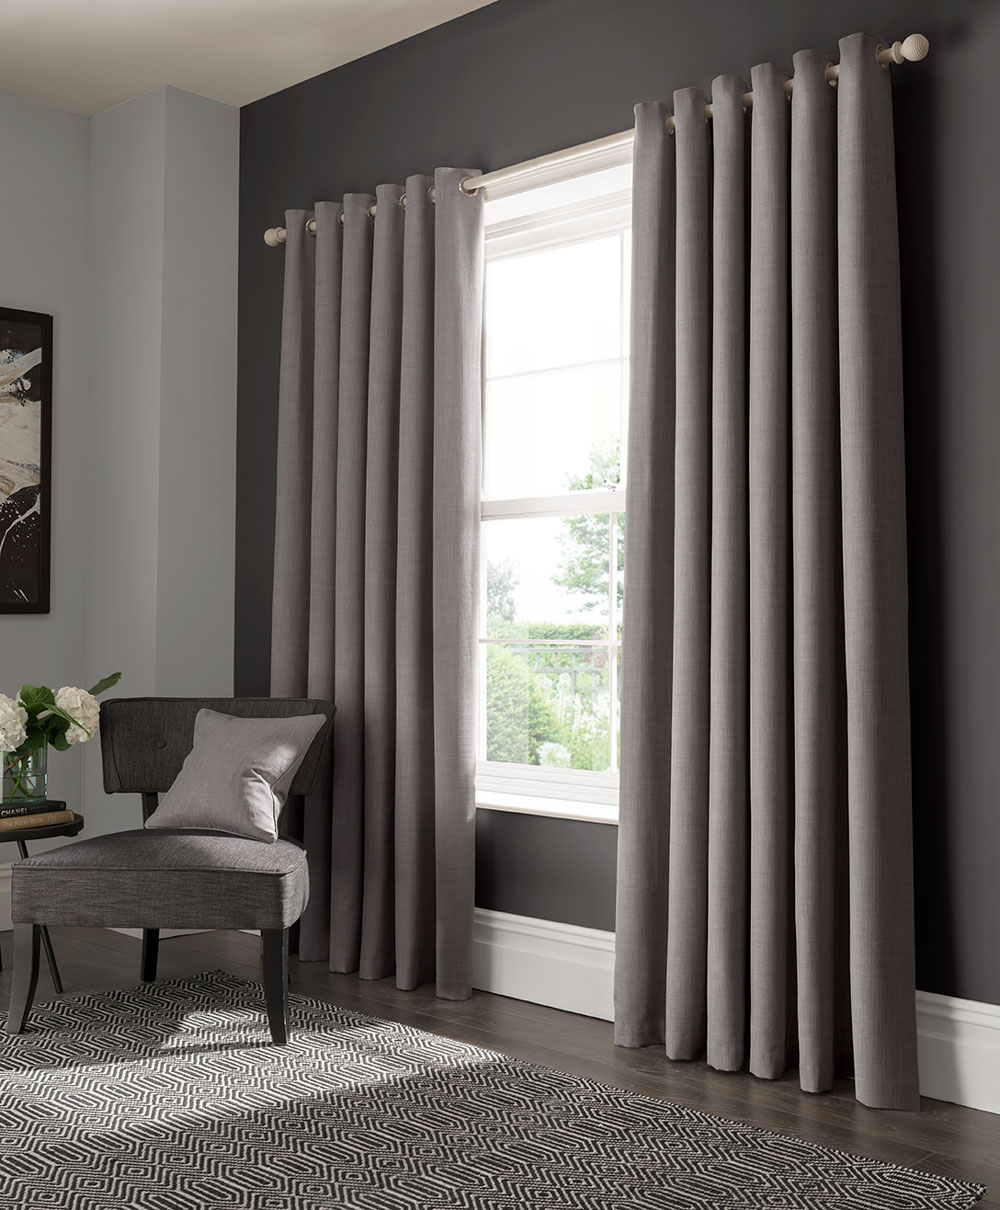 Elba Eyelet Curtains Ready Made Curtains - Grey  - by Studio G